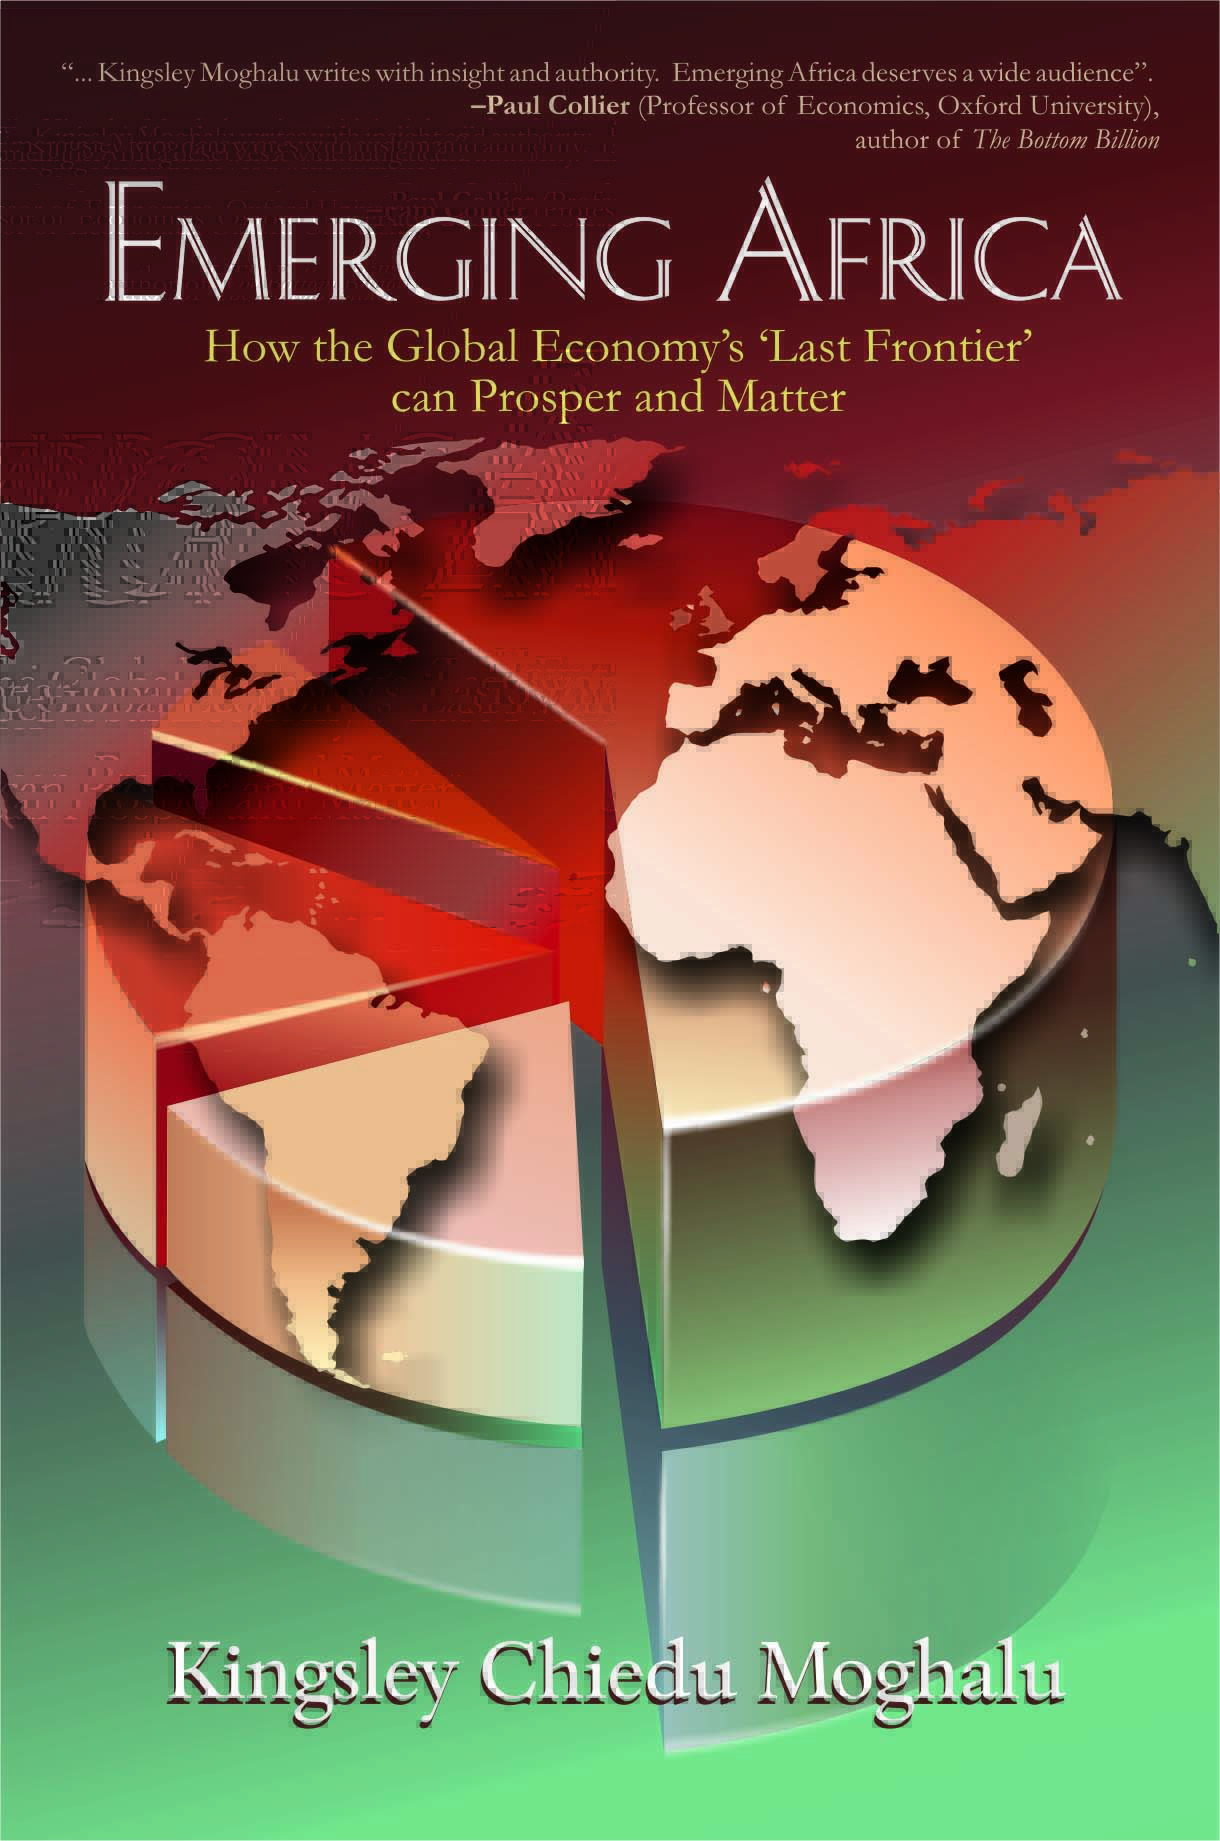 Book Review – EMERGING AFRICA: How the Global Economy’s “Last Frontier” Can Prosper and Matter by Sakina Badamasuiy